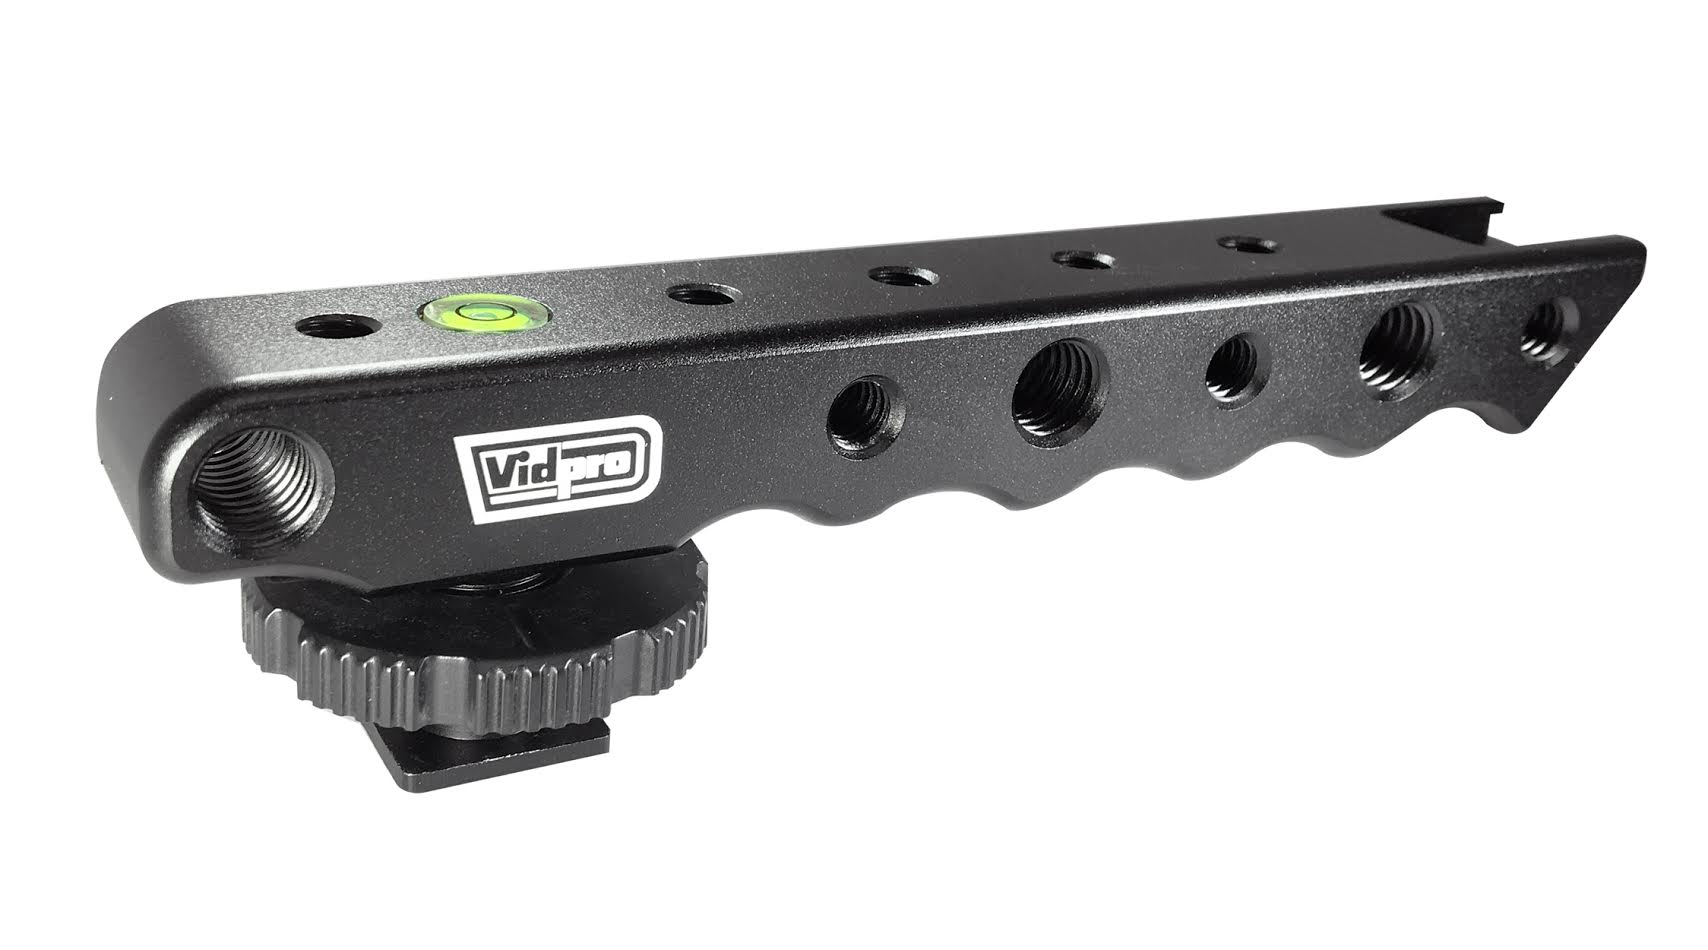 Video Stabilizers for CanonDigital Camera